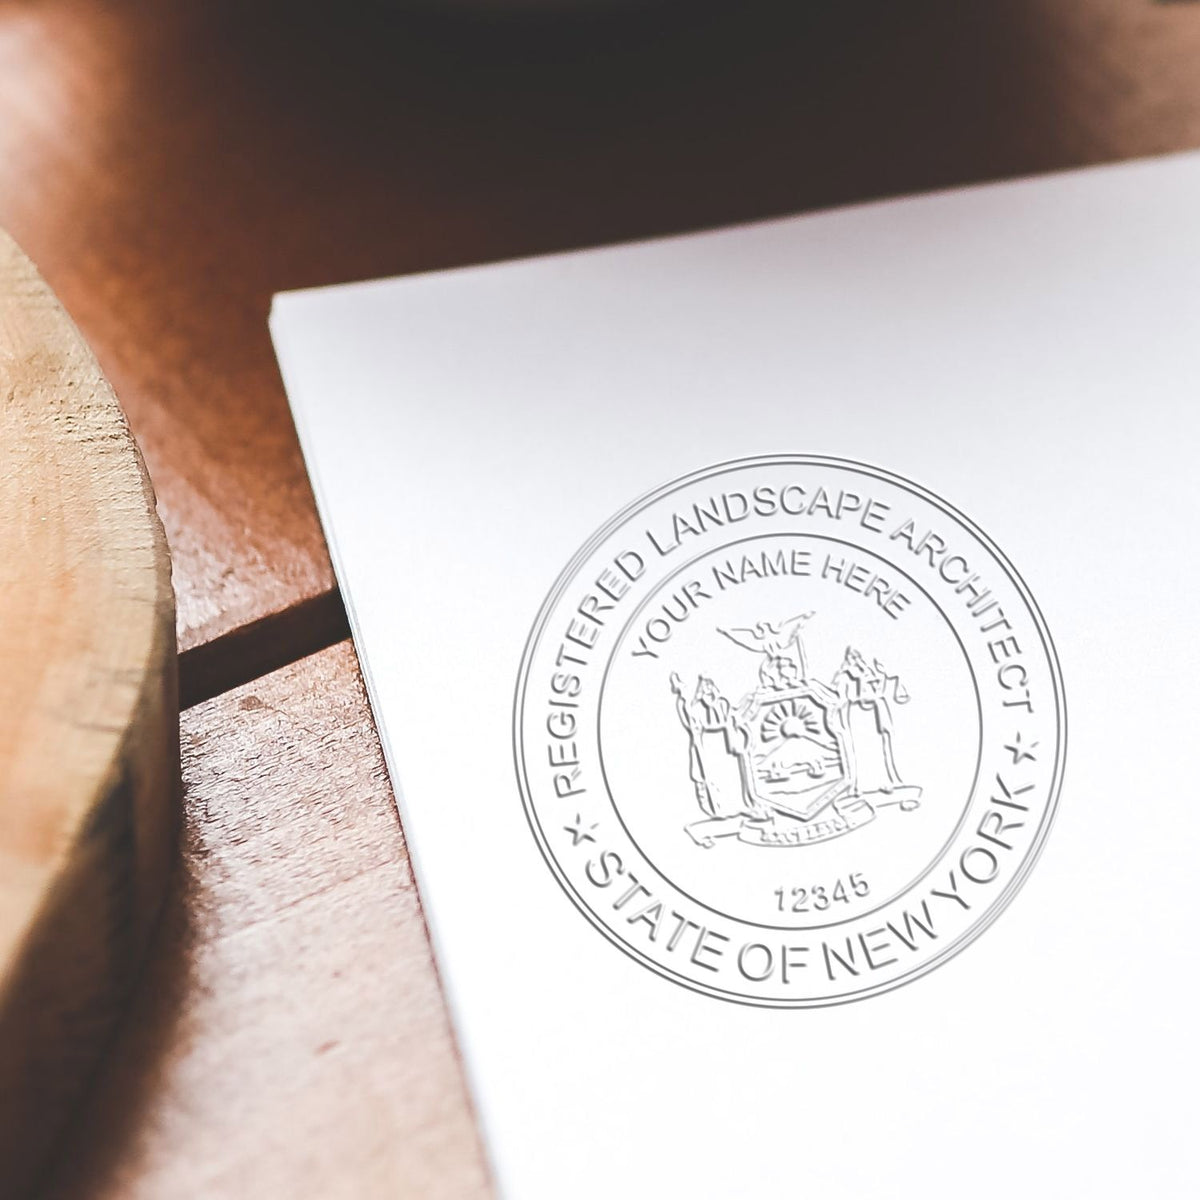 An alternative view of the Gift New York Landscape Architect Seal stamped on a sheet of paper showing the image in use